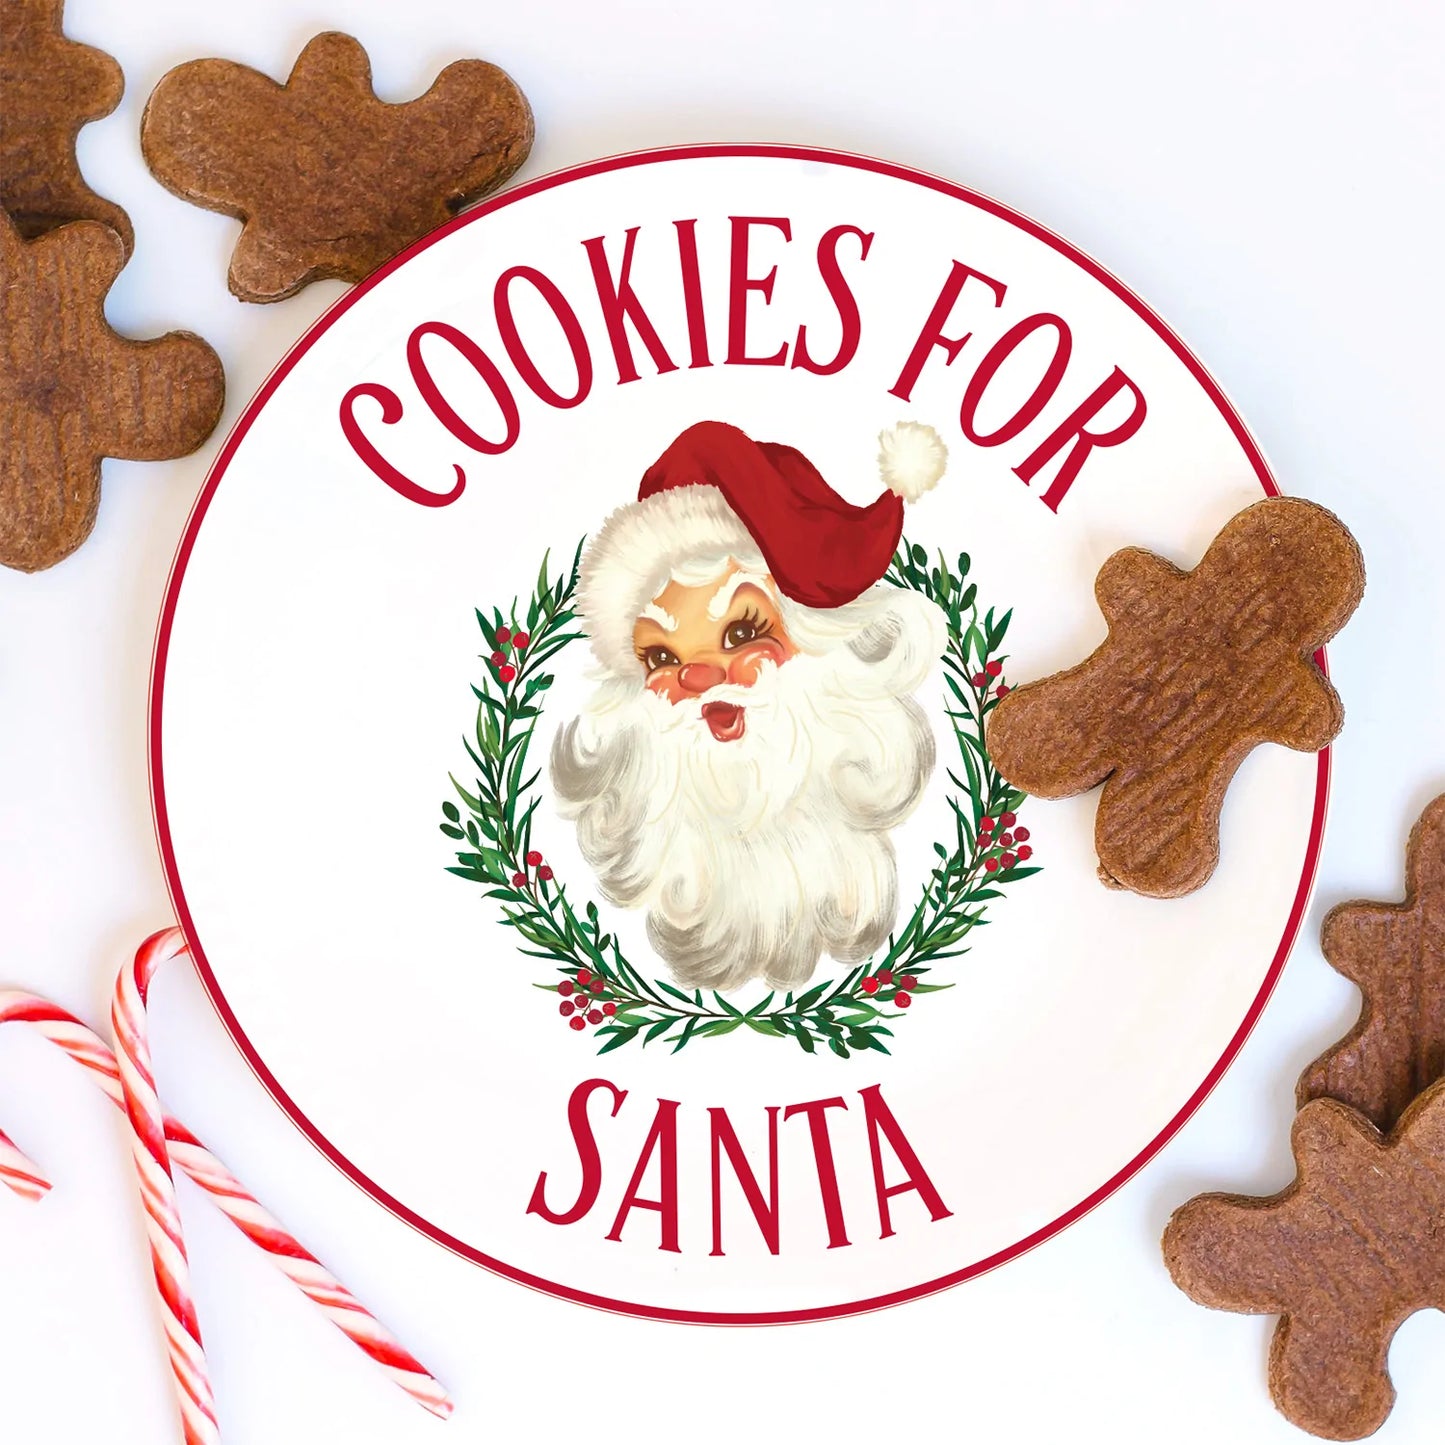 Round Cookies Platter with Santa